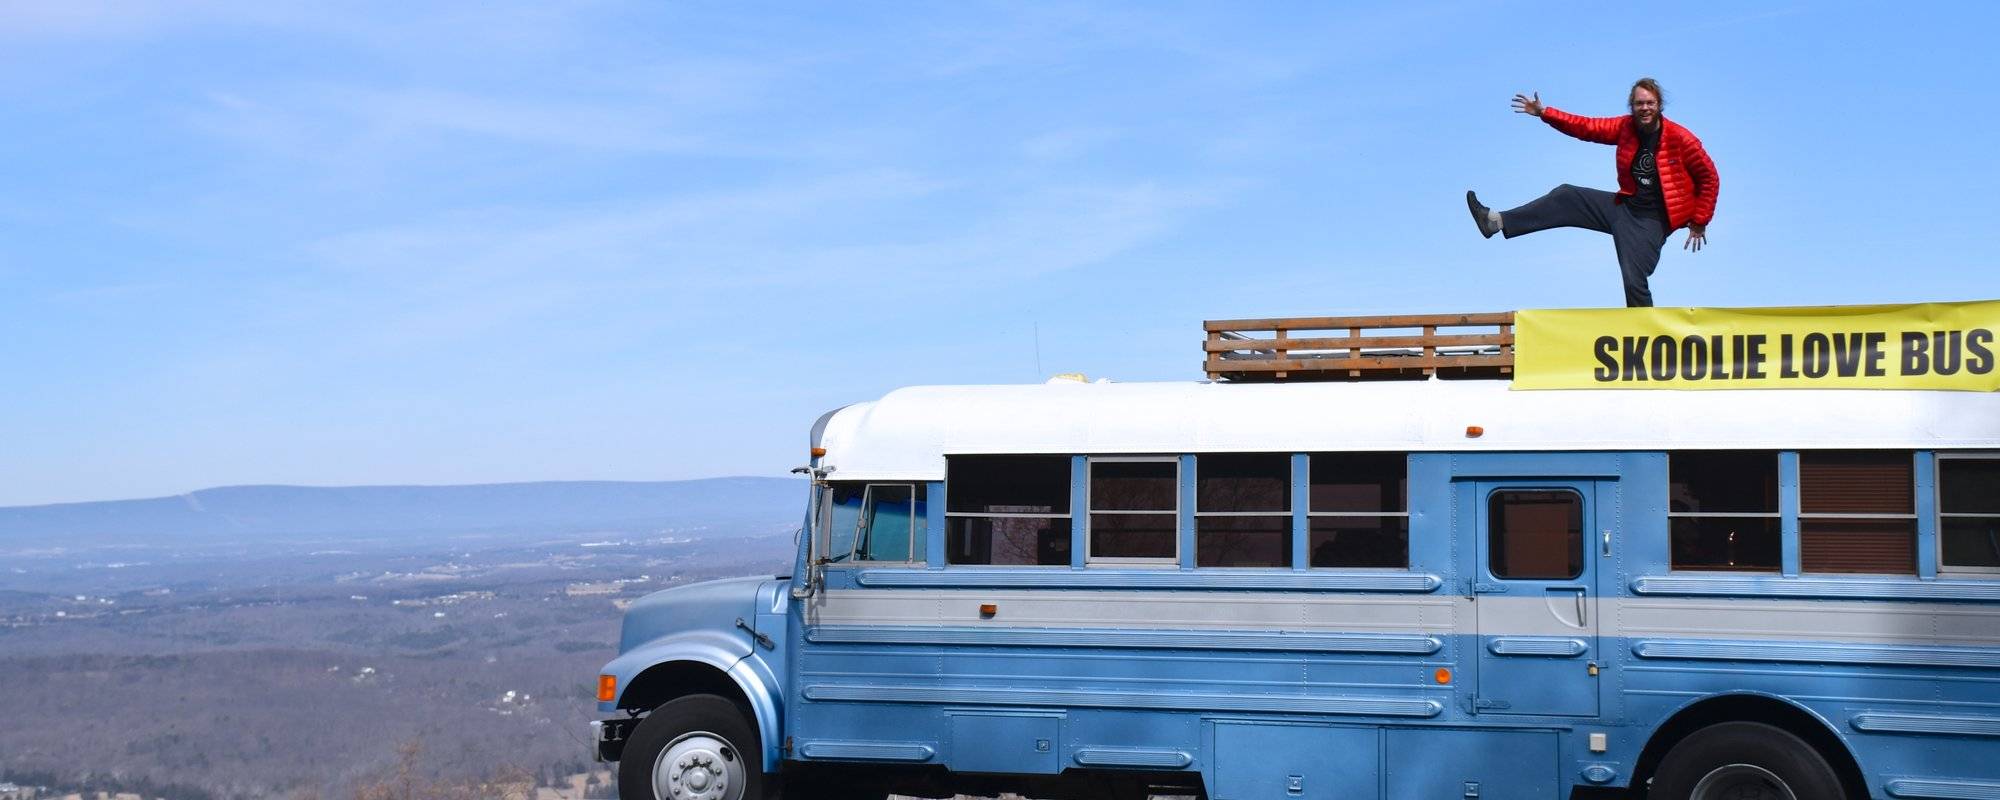 Four years ago I moved into a School Bus: Here's why.